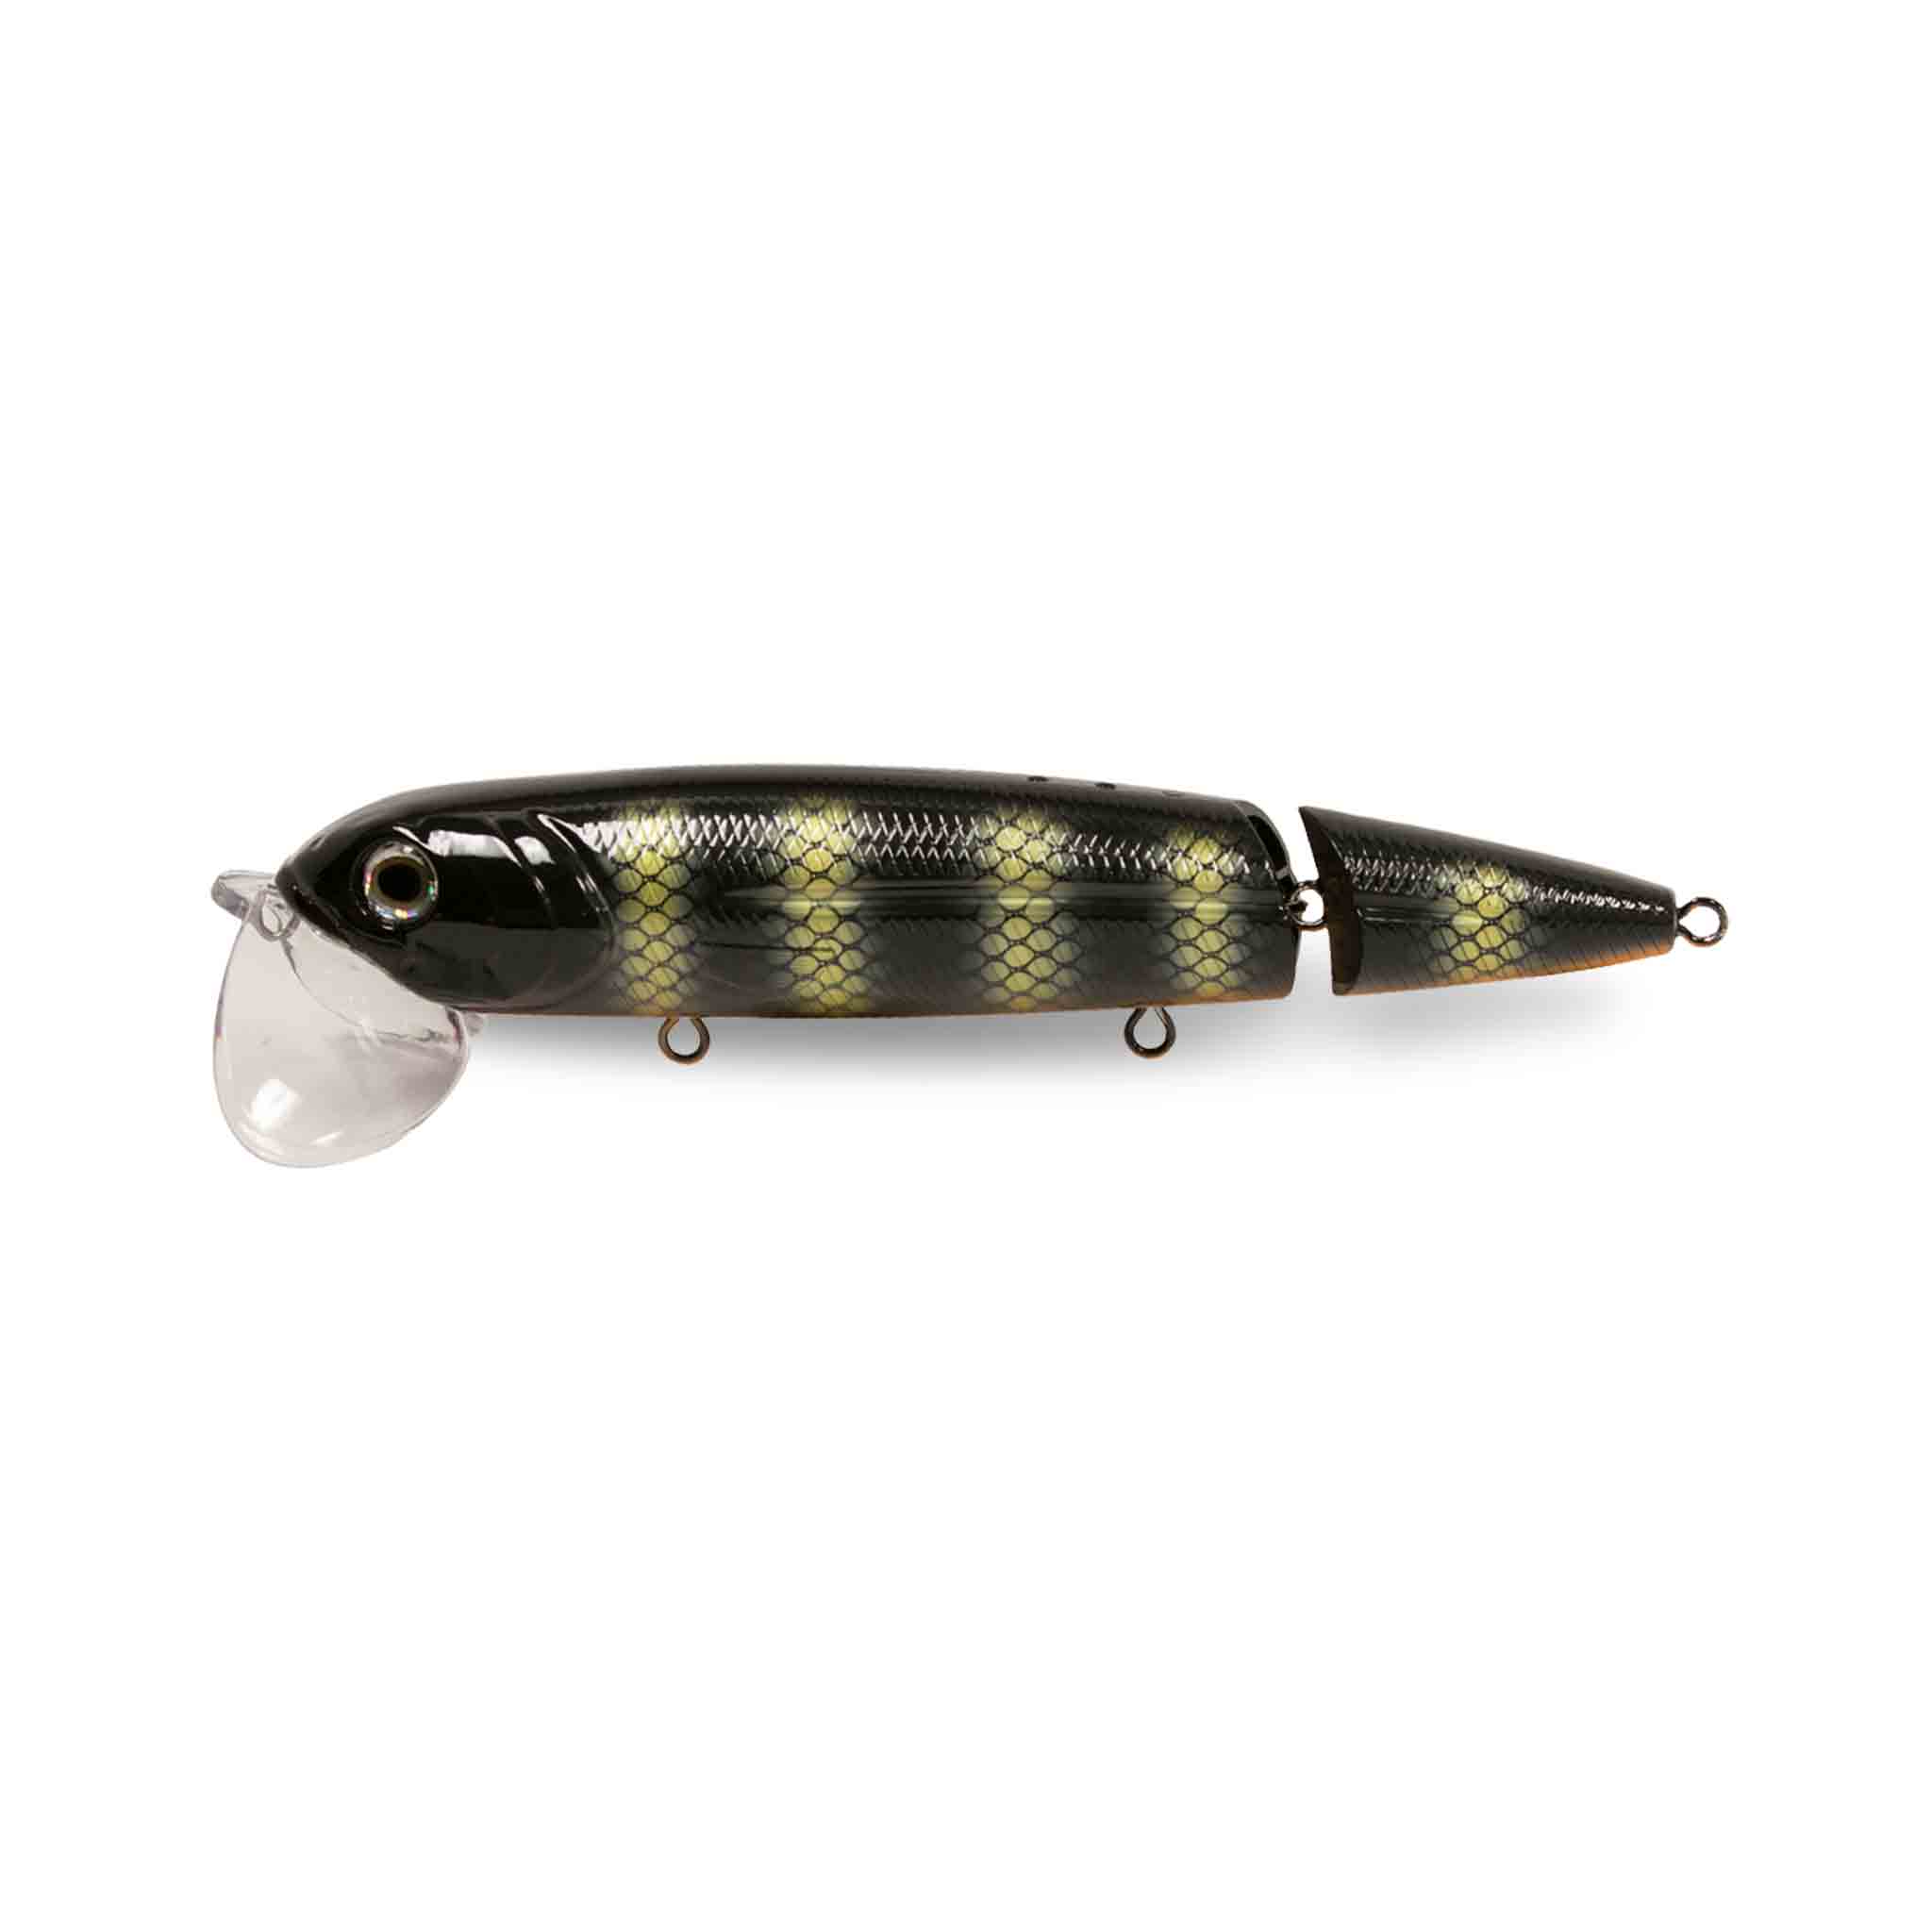 Set of 2 Silver & Gold Minnow Lures 